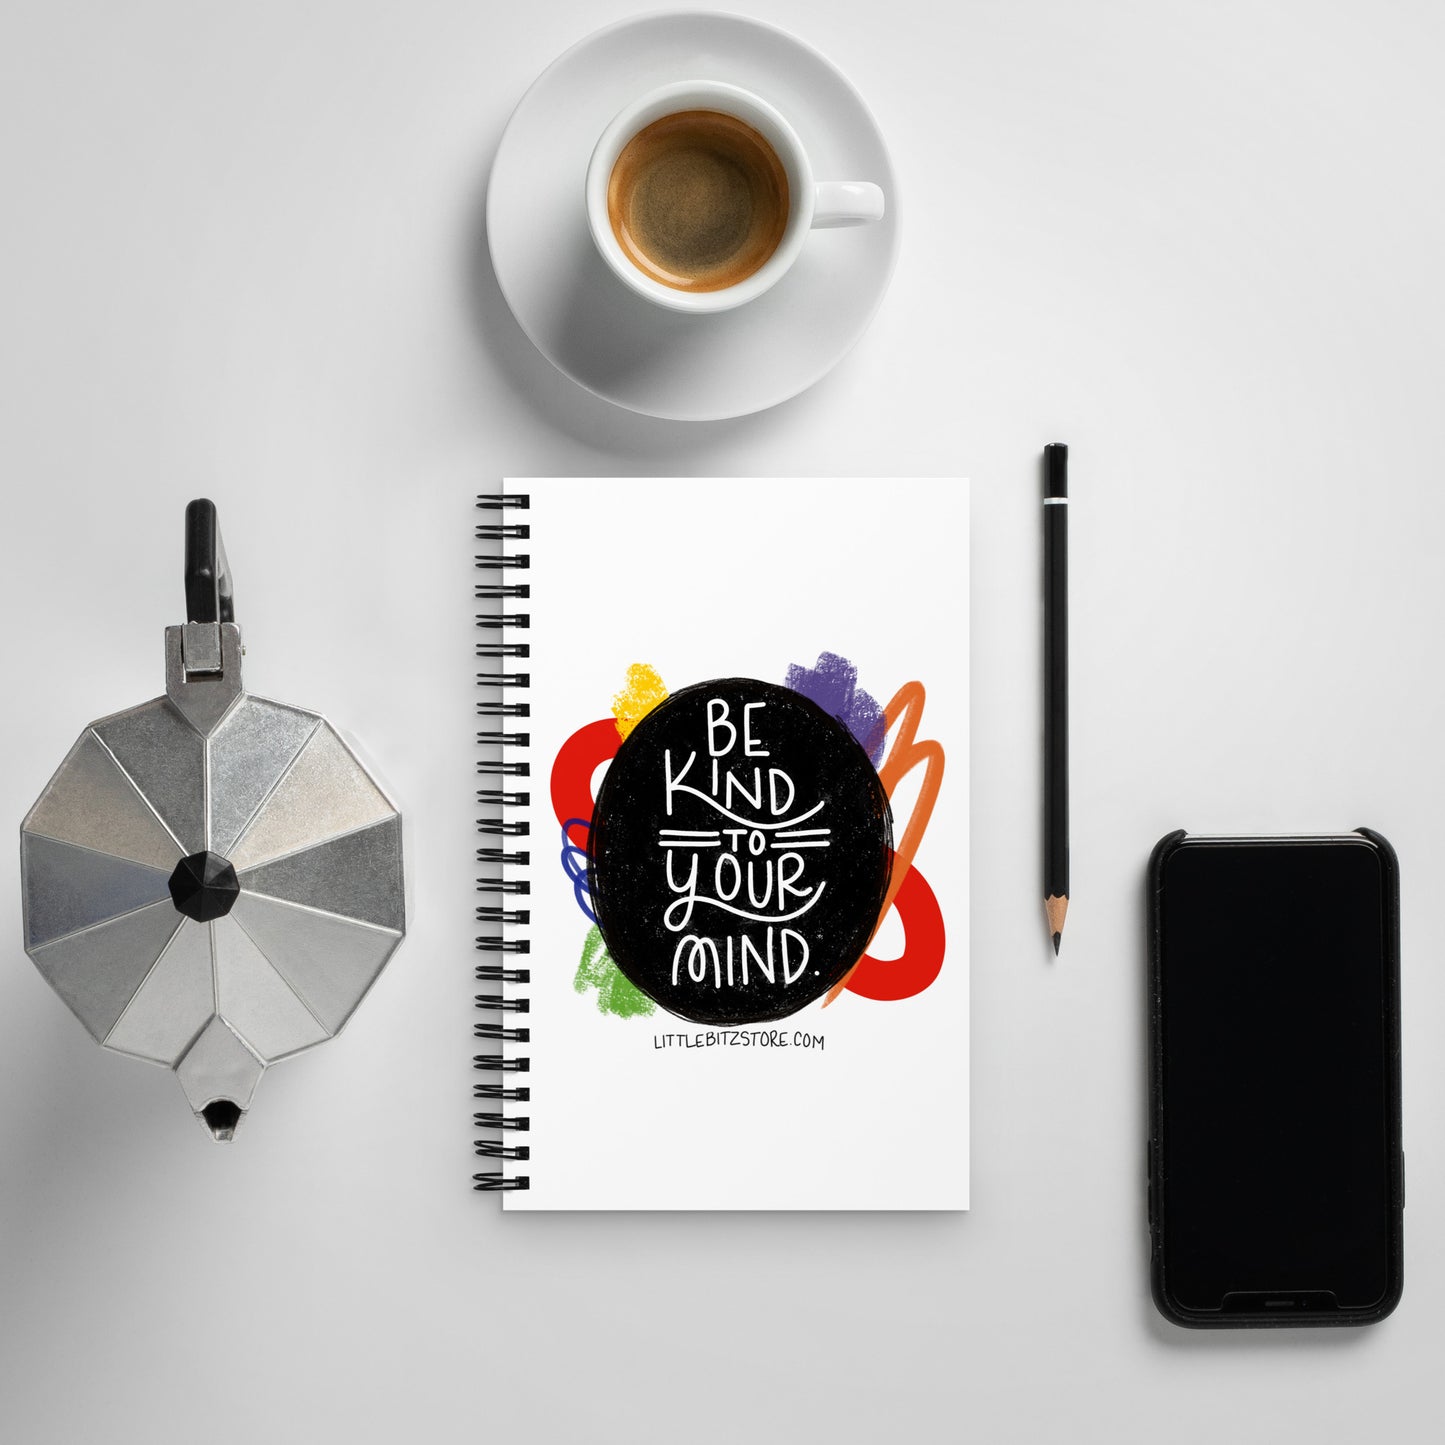 Be Kind to Your Mind - Spiral Notebook